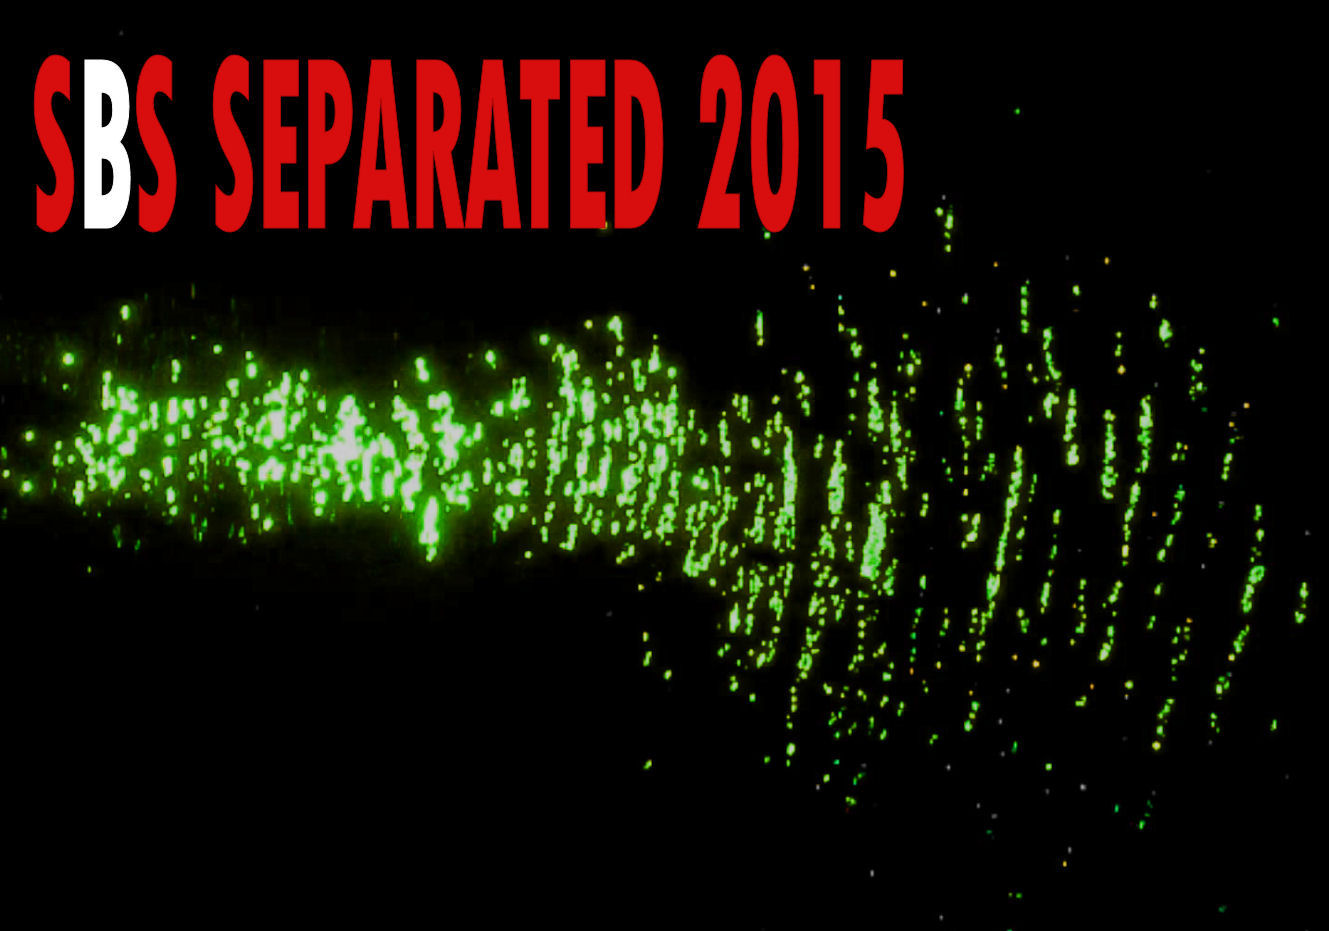  SBS Separated 006 – Acres Of Lions (Live @ SBS 2013)